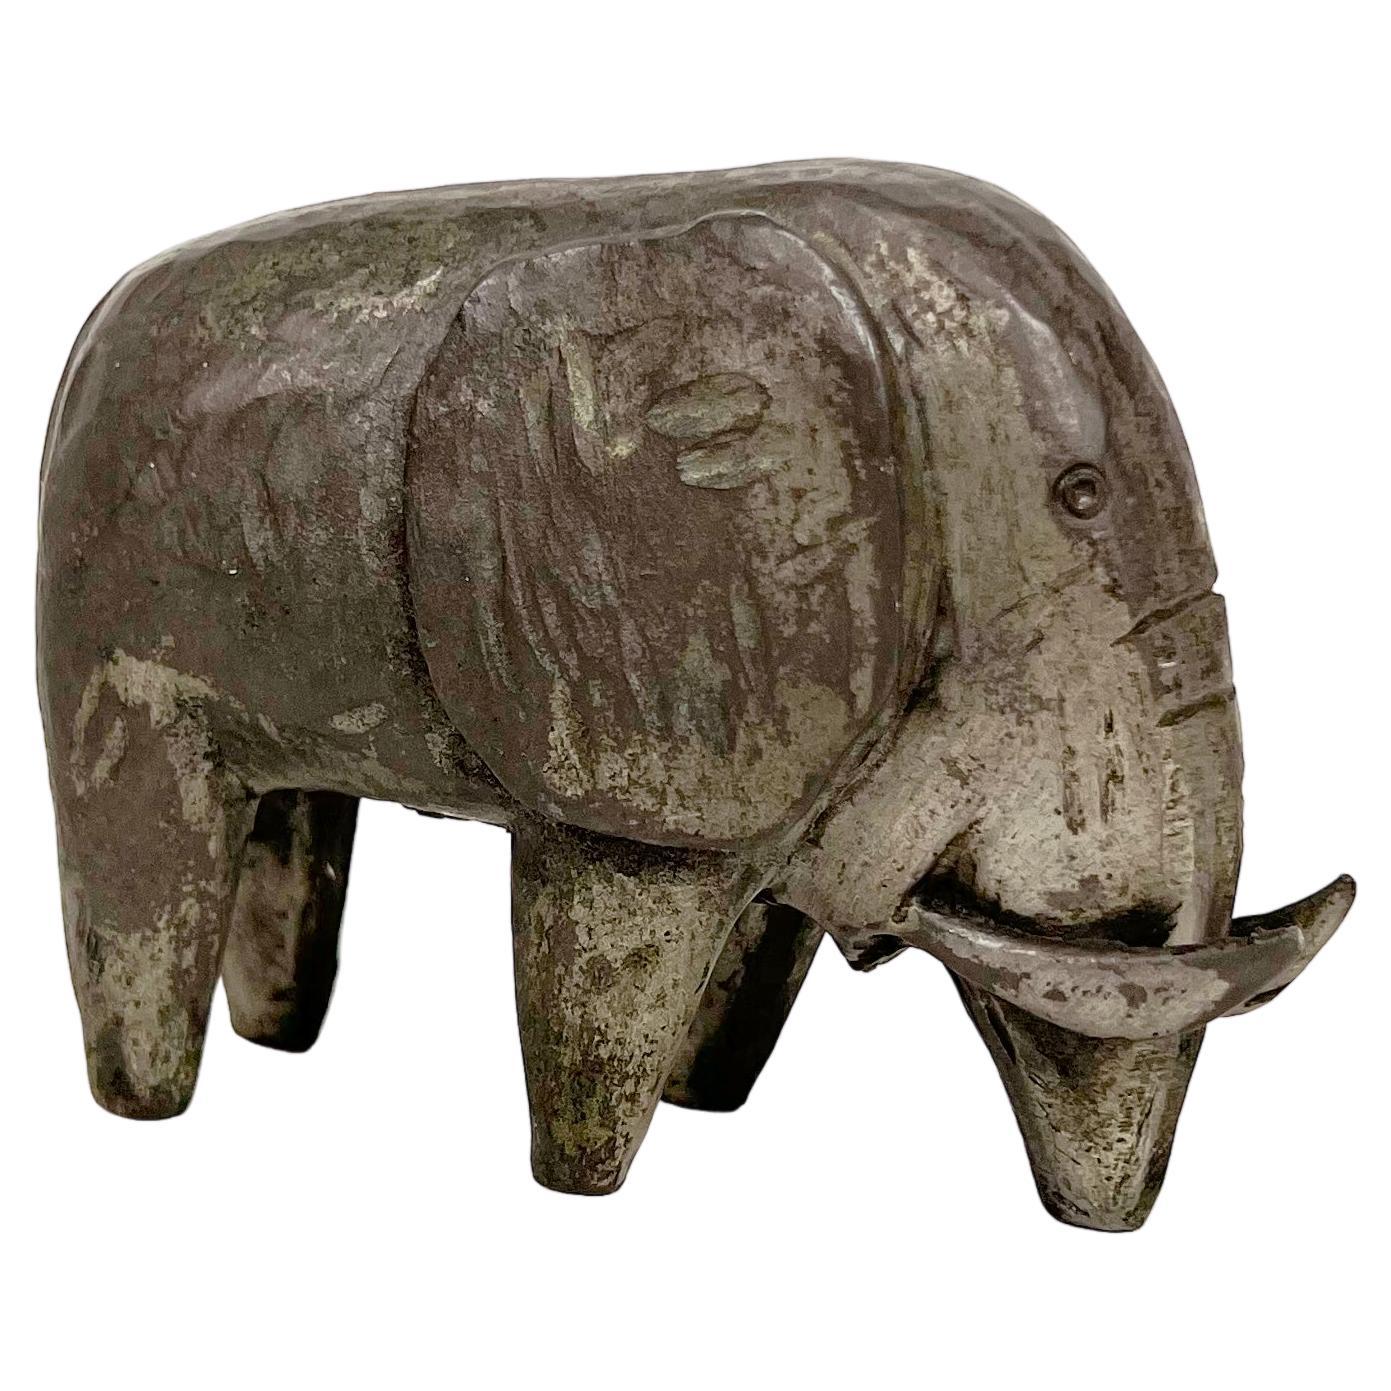 Pewter Mammoth Figurine by Stieff / Smithsonian For Sale